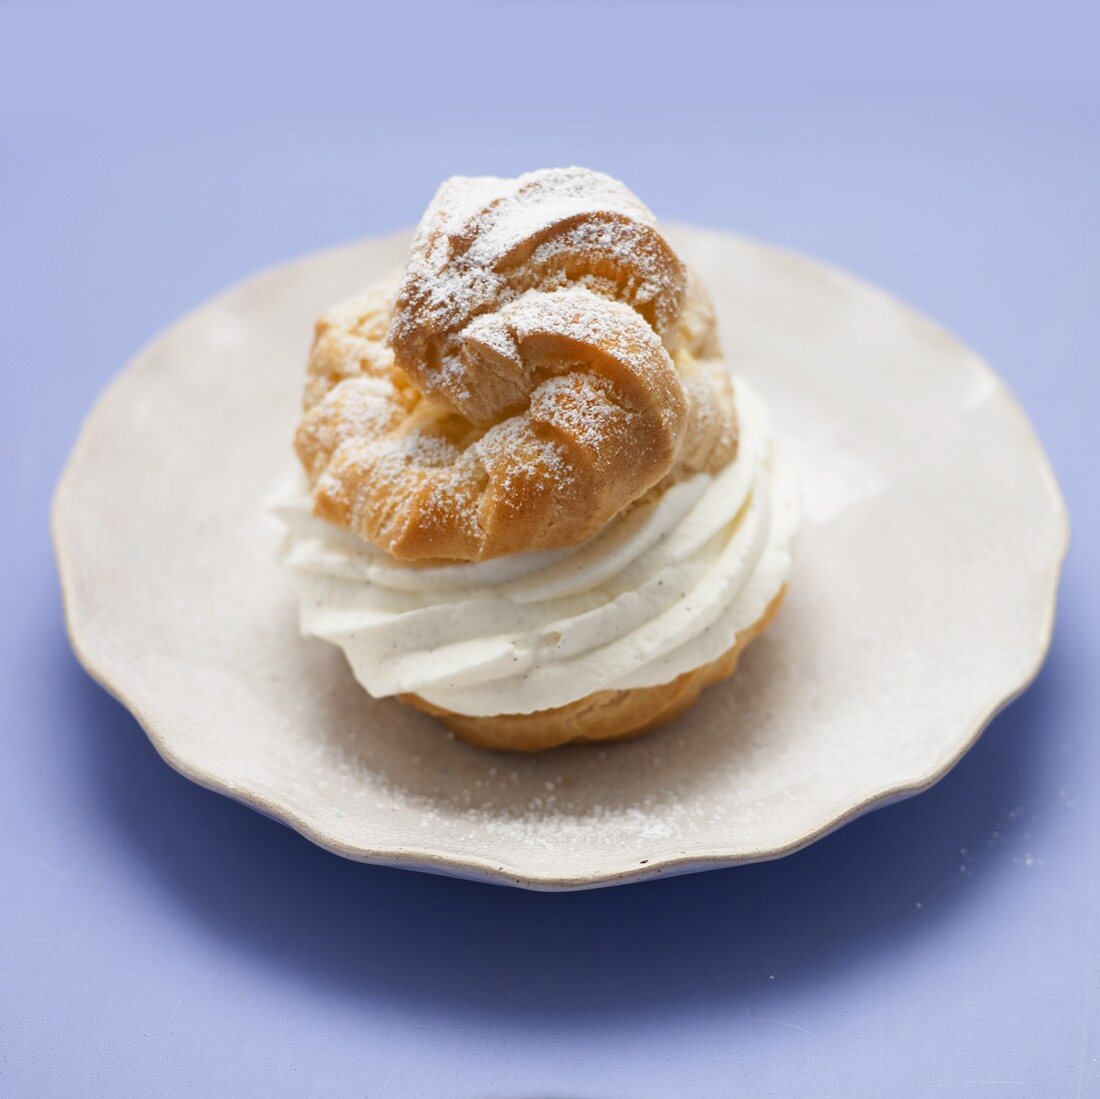 A fresh profiterole filled with cream